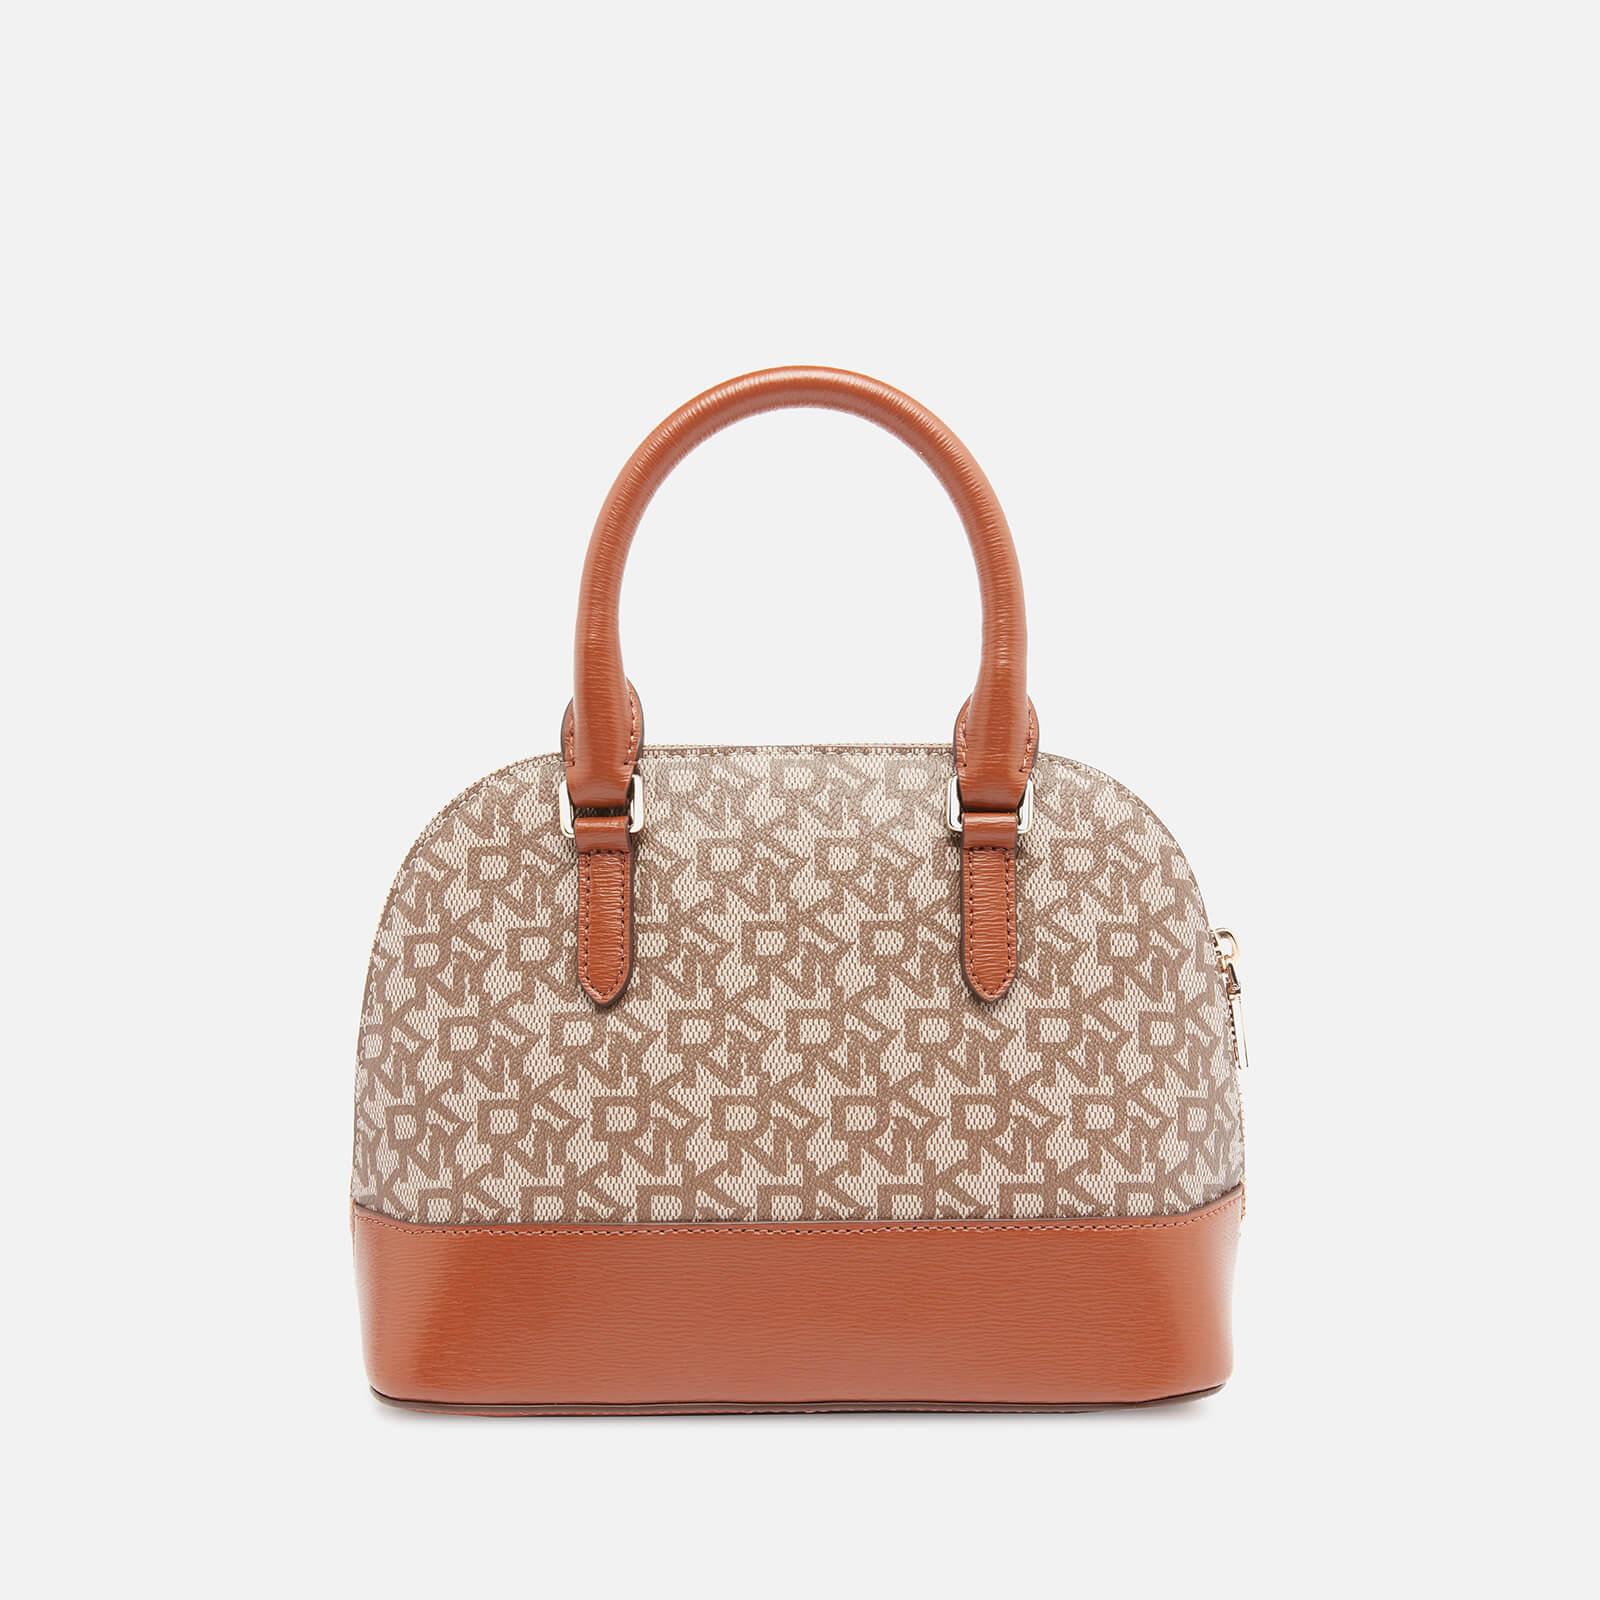 DKNY Bryant Park Dome Satchel in Brown | Lyst